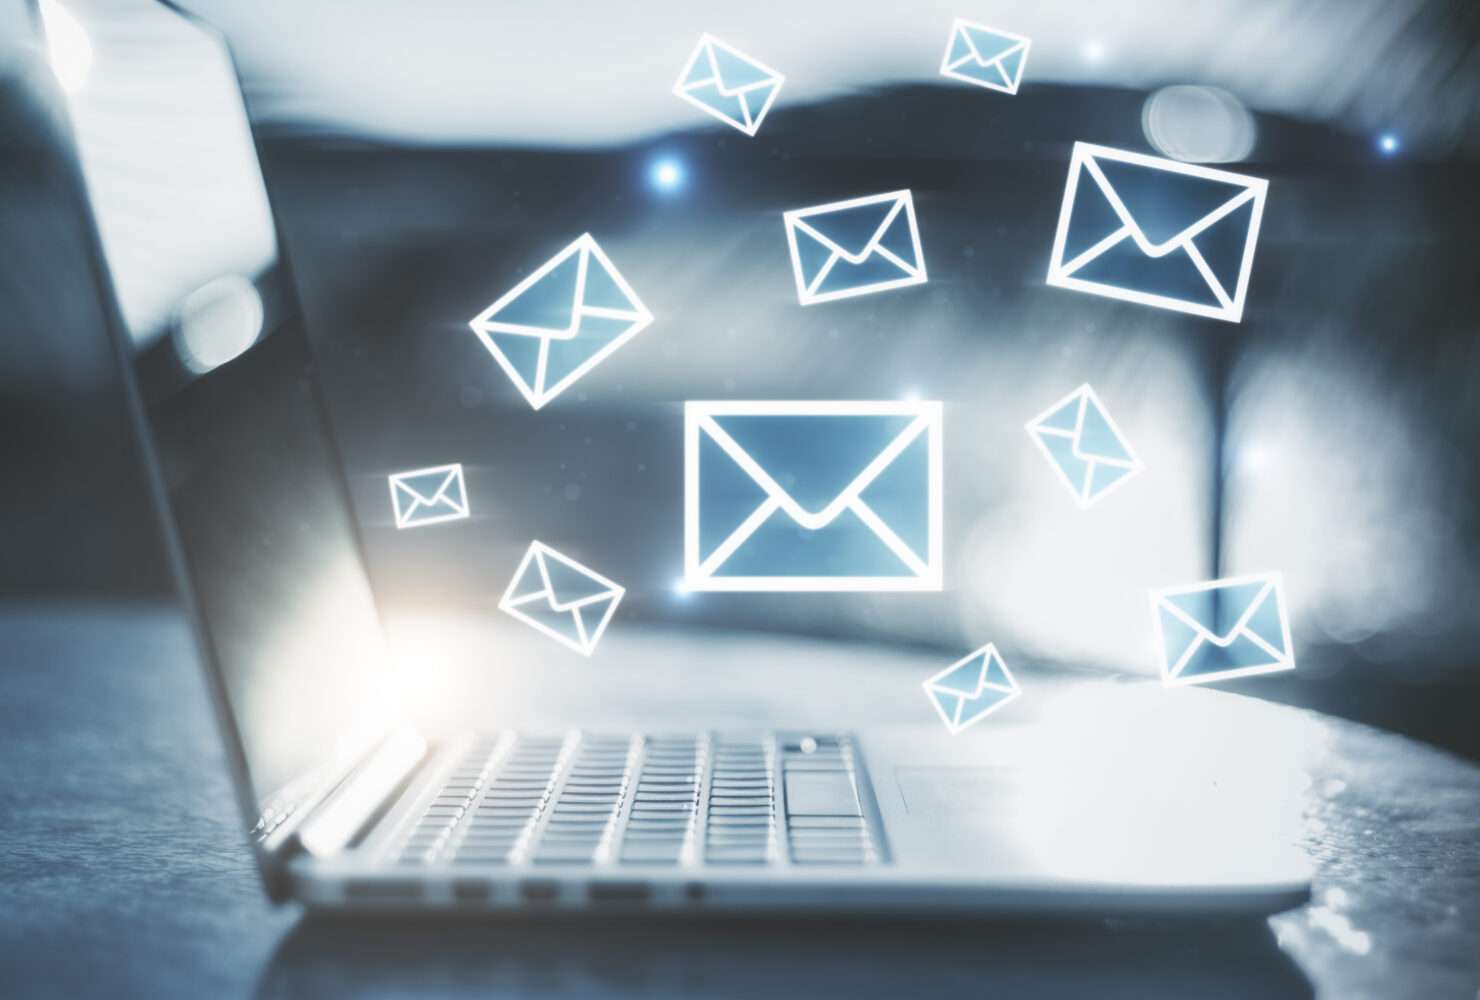 Email Encryption Market Assessment, Worldwide Growth, Key Players, Analysis and Forecast to 2030